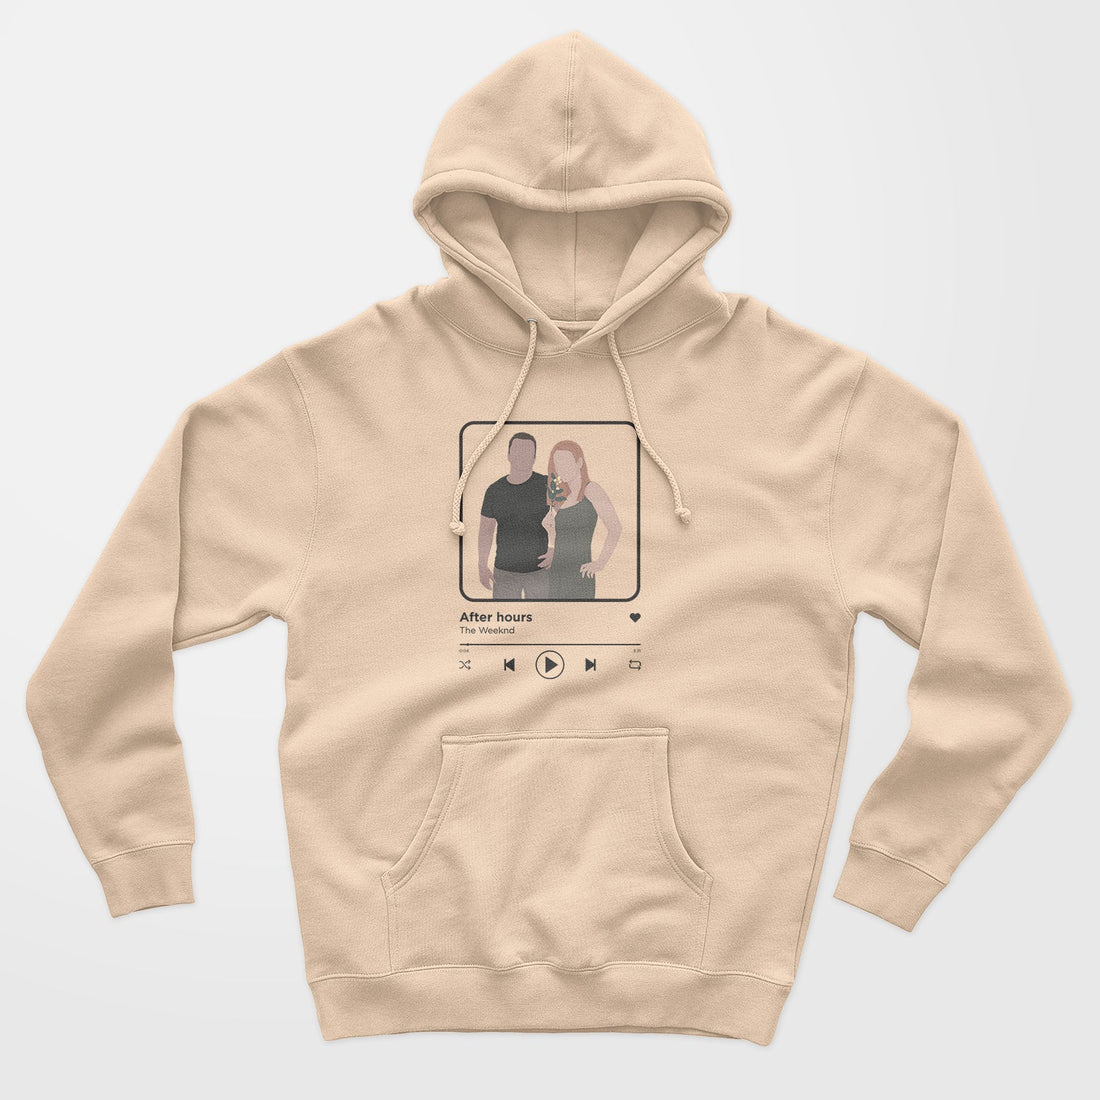 Personalisierter Hoodie Pullover Spotify Song Mit Illustration